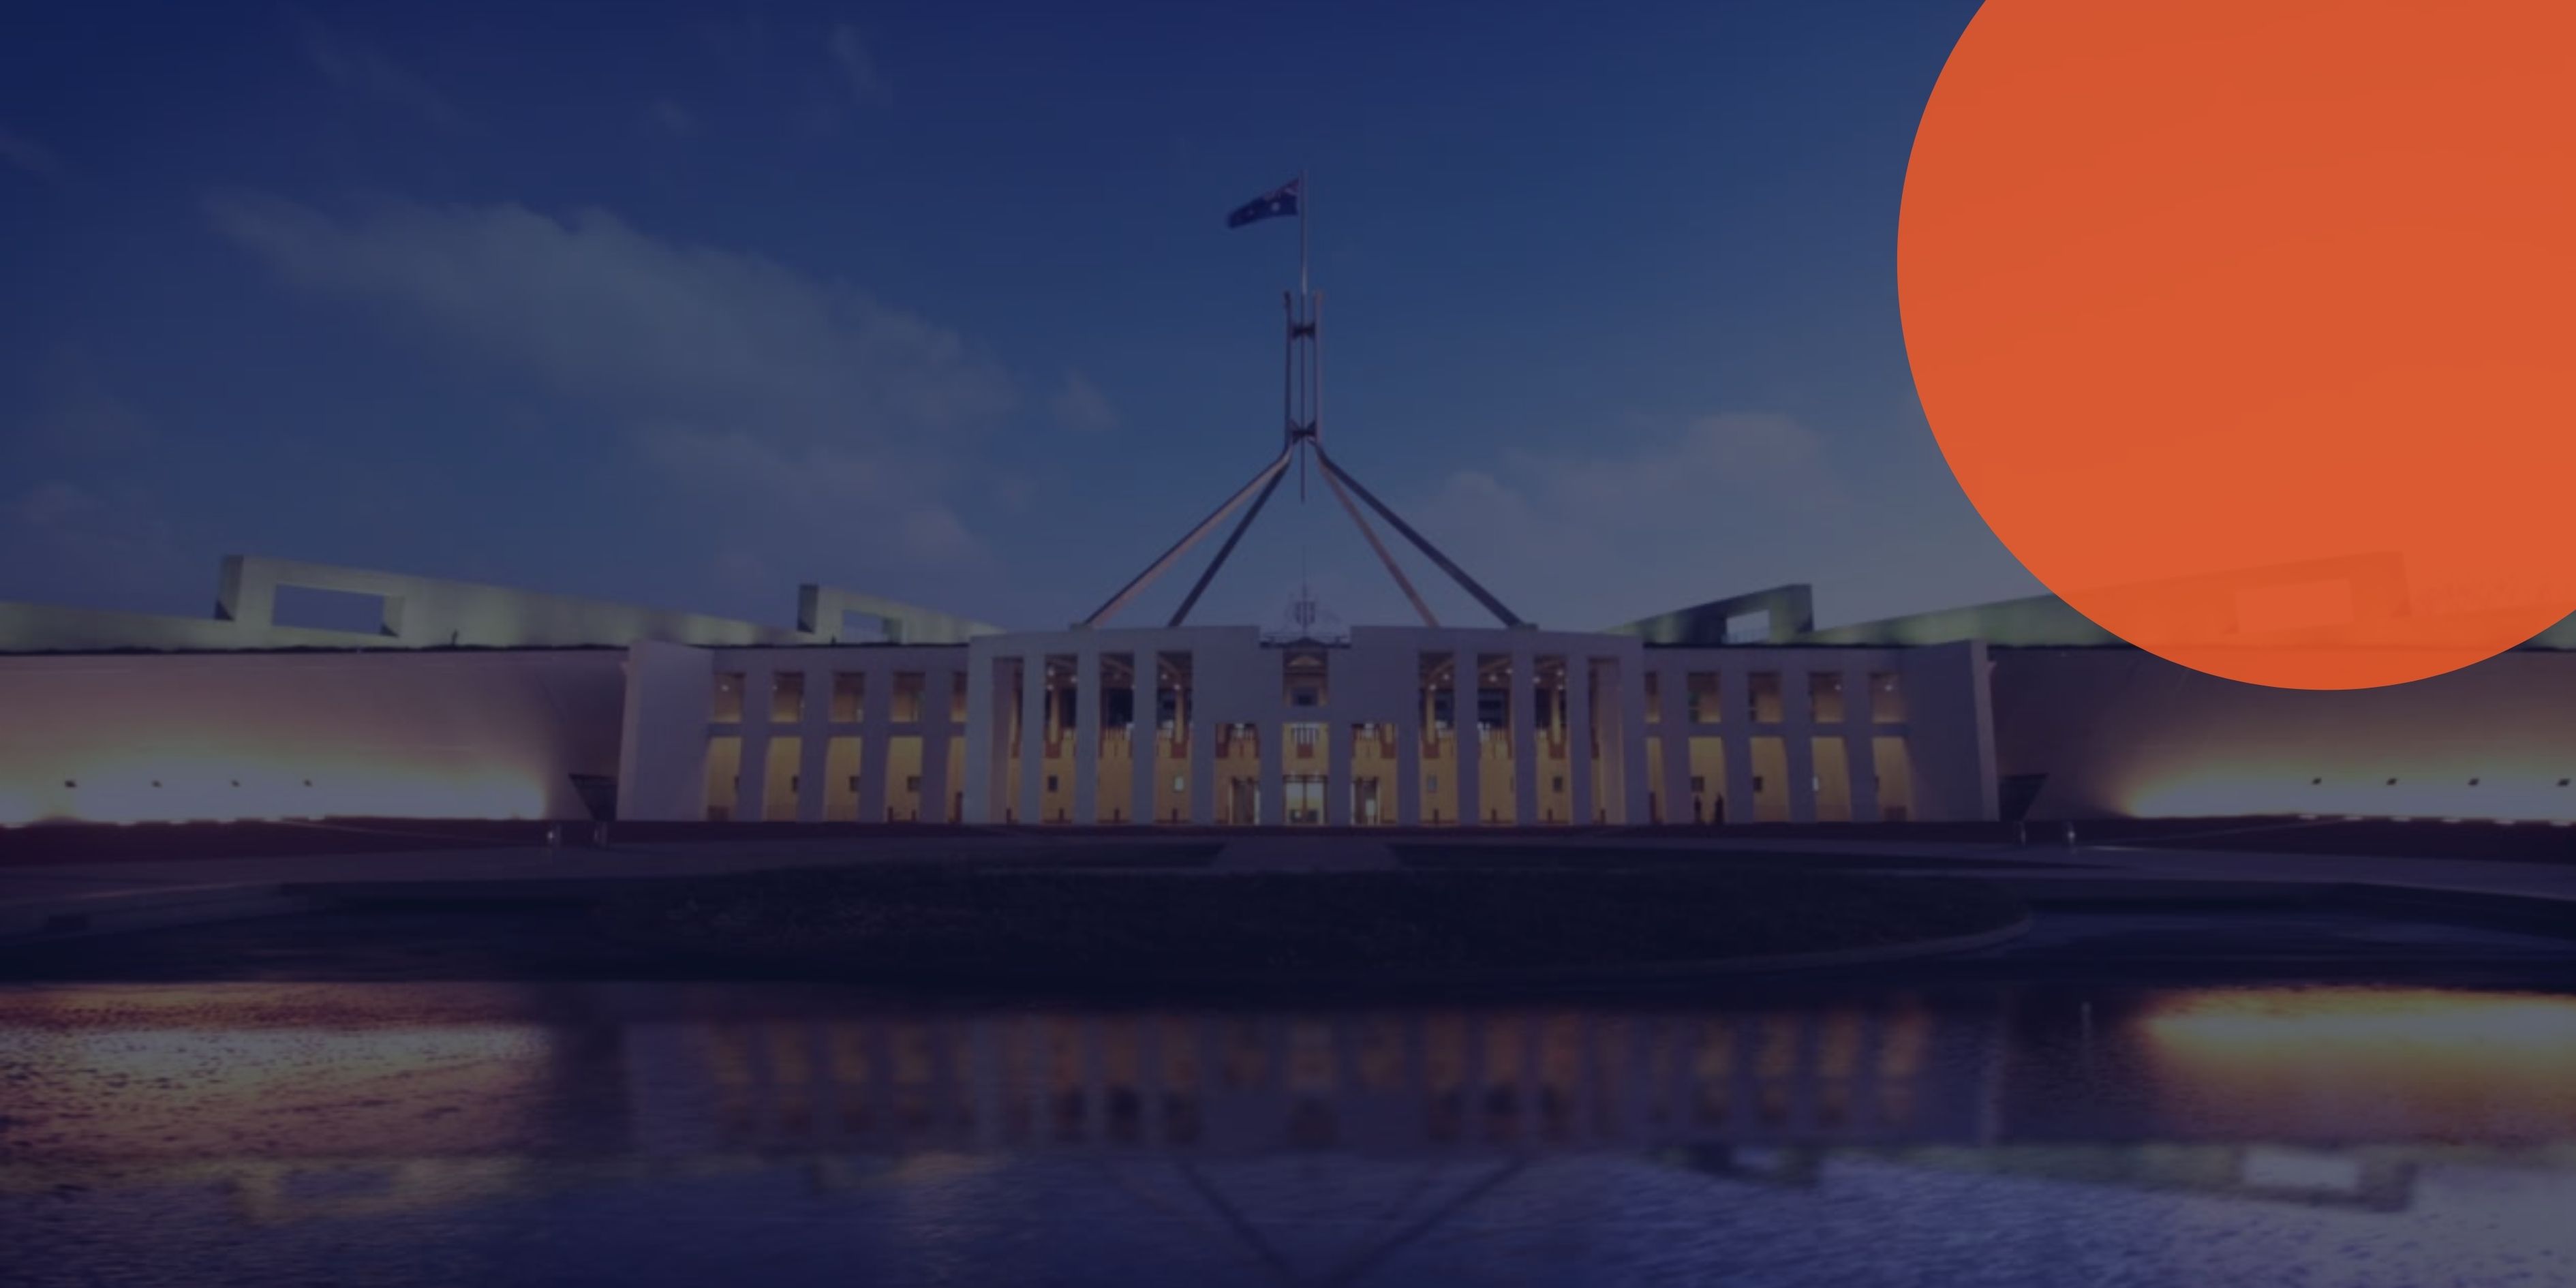 Federal Budget 2022 The experts guide to getting your voice heard